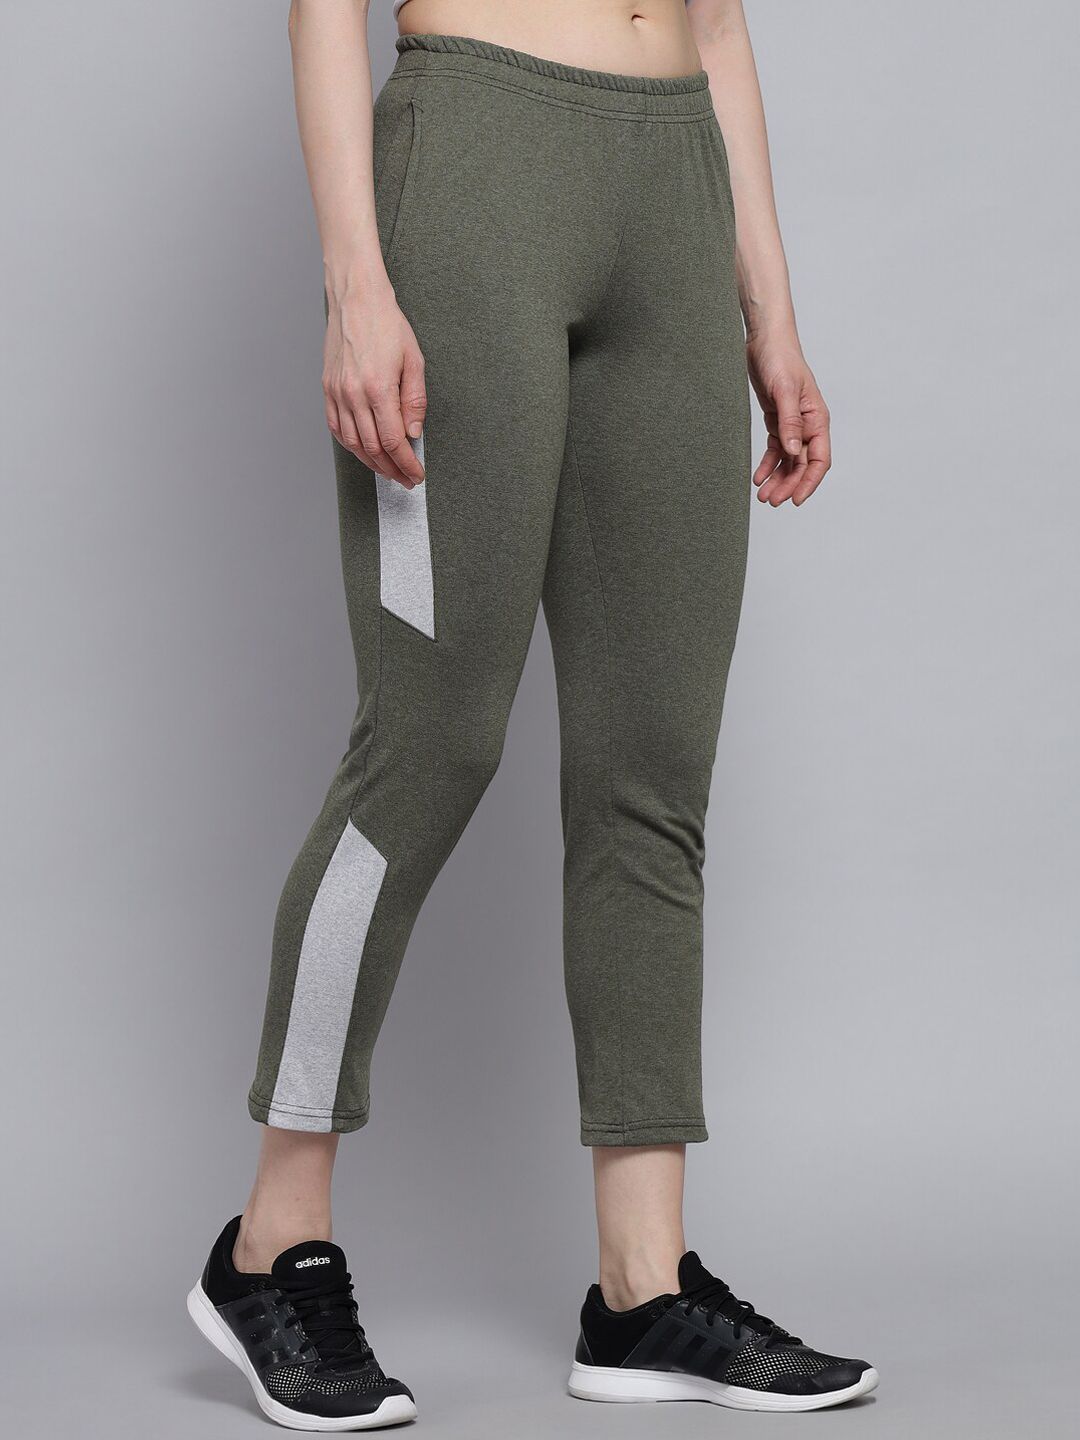 Q-rious Women Olive-Green Printed Pure-Cotton Track Pants Price in India